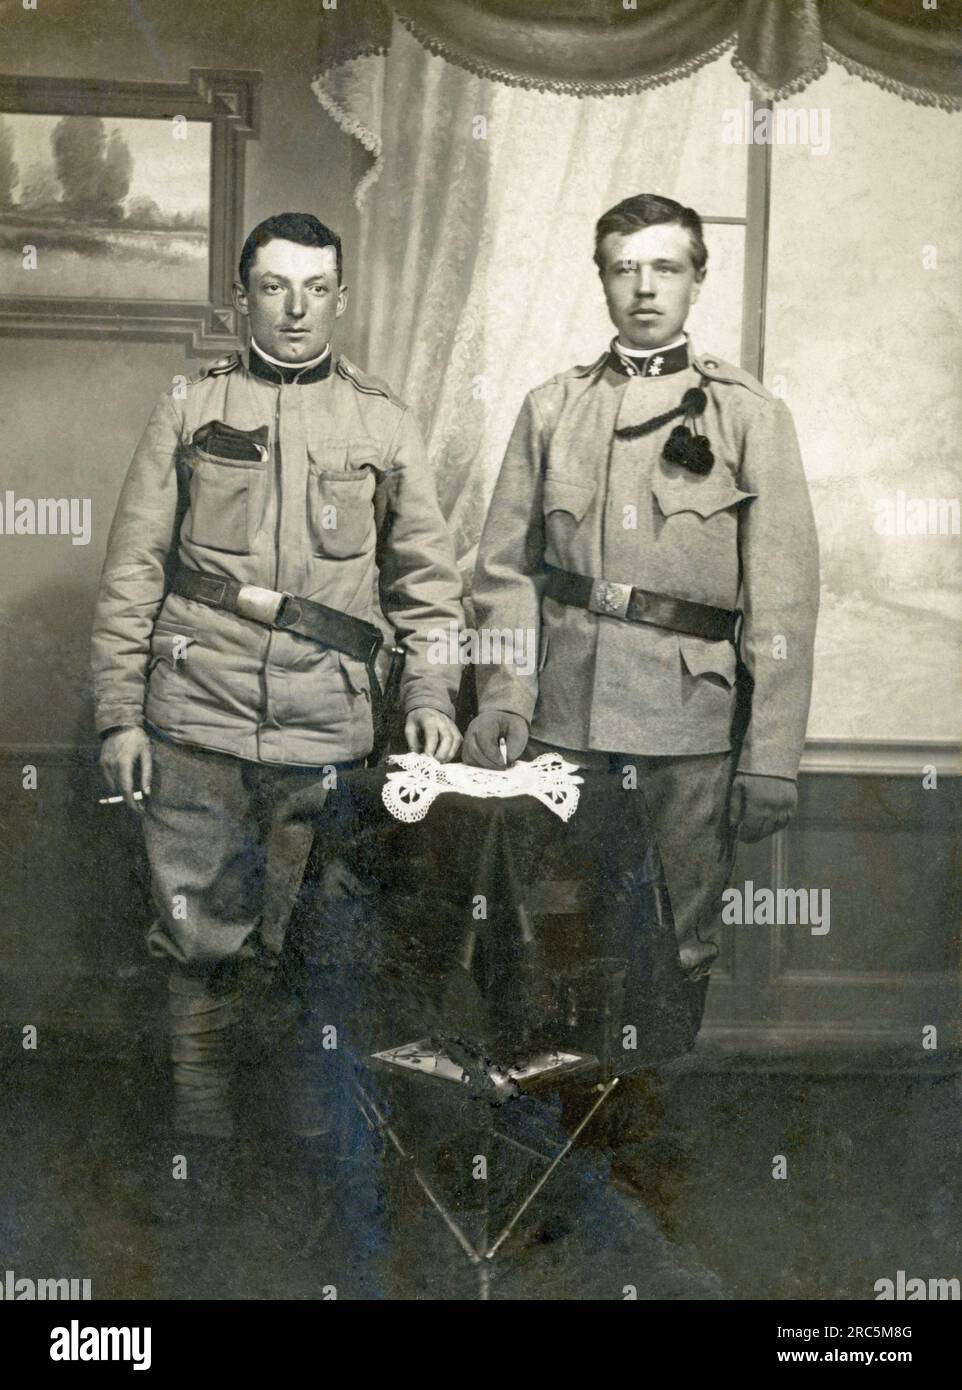 Vintage photograph of two soldiers in the Austro-Hungarian Military 1914-1918, (KuK WWI: Imperial and Royal: Kaiserlich und Koniglich) Stock Photo